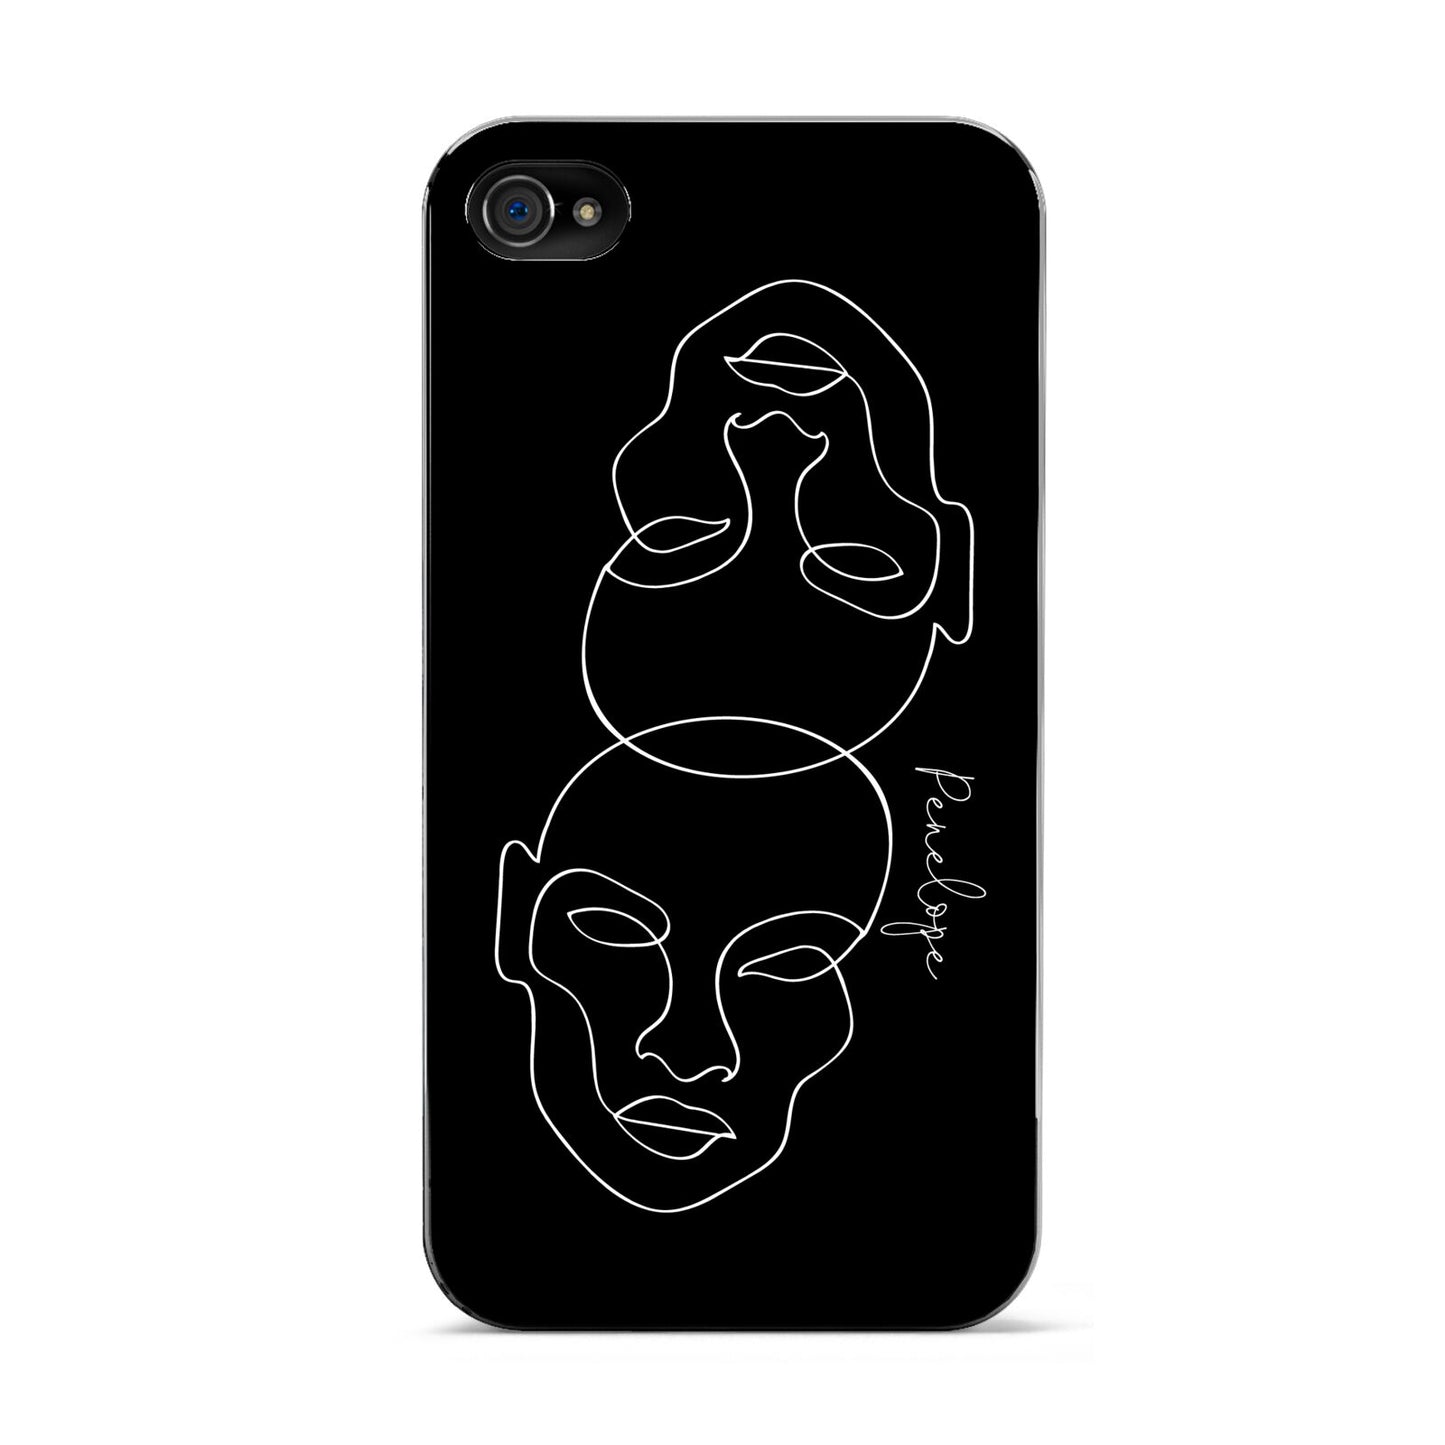 Personalised Abstract Line Art Apple iPhone 4s Case